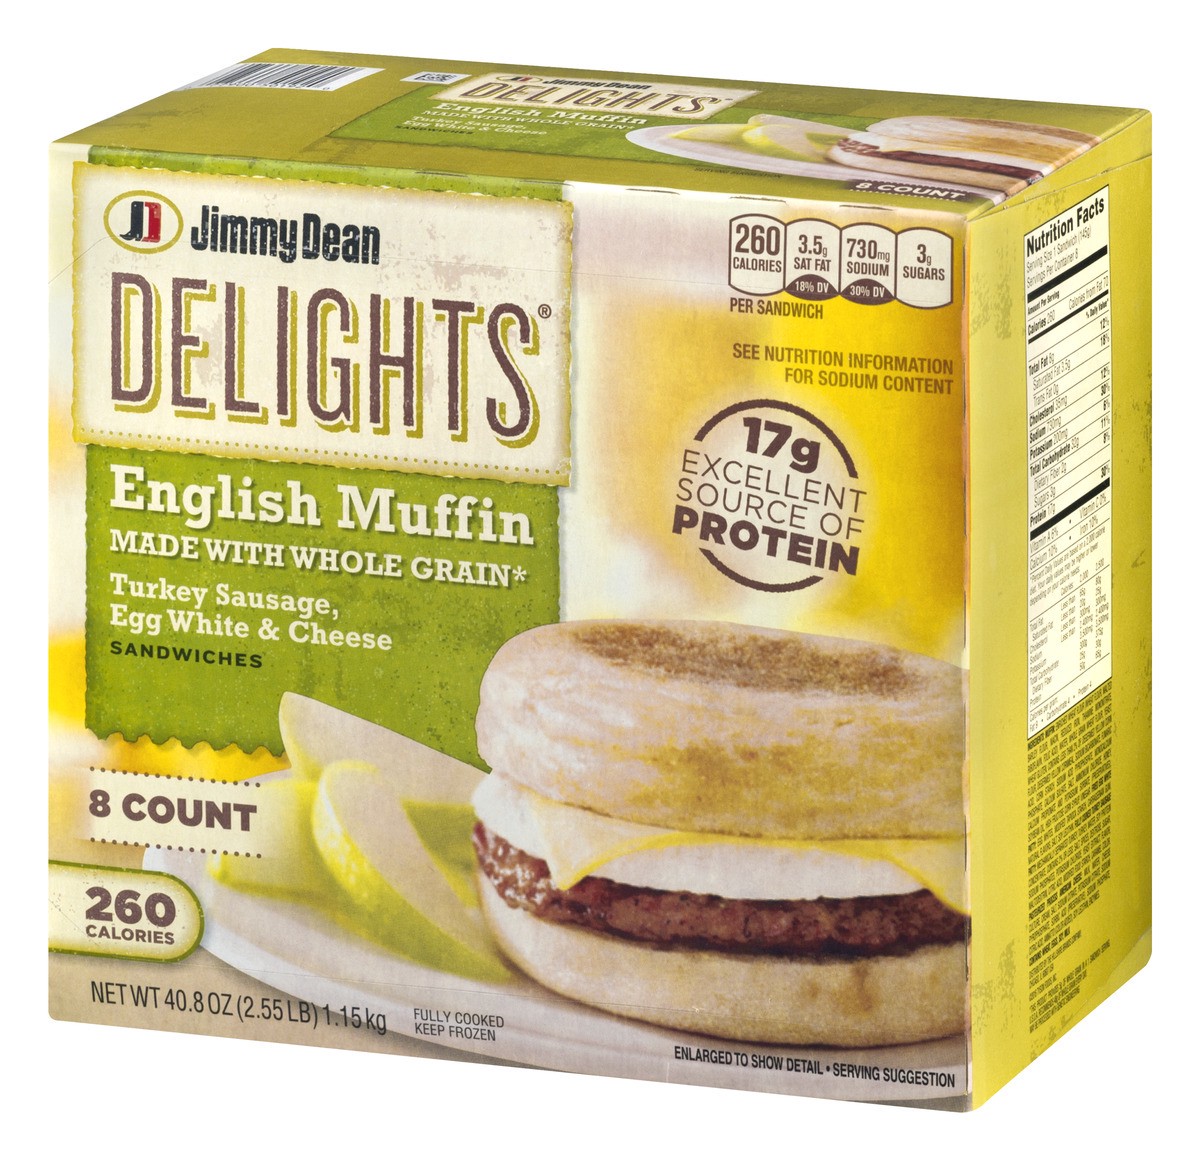 slide 3 of 9, Jimmy Dean Delights English Muffin Breakfast Sandwiches with Turkey Sausage, Egg White, and Cheese, Frozen, 8 Count, 1.16 kg